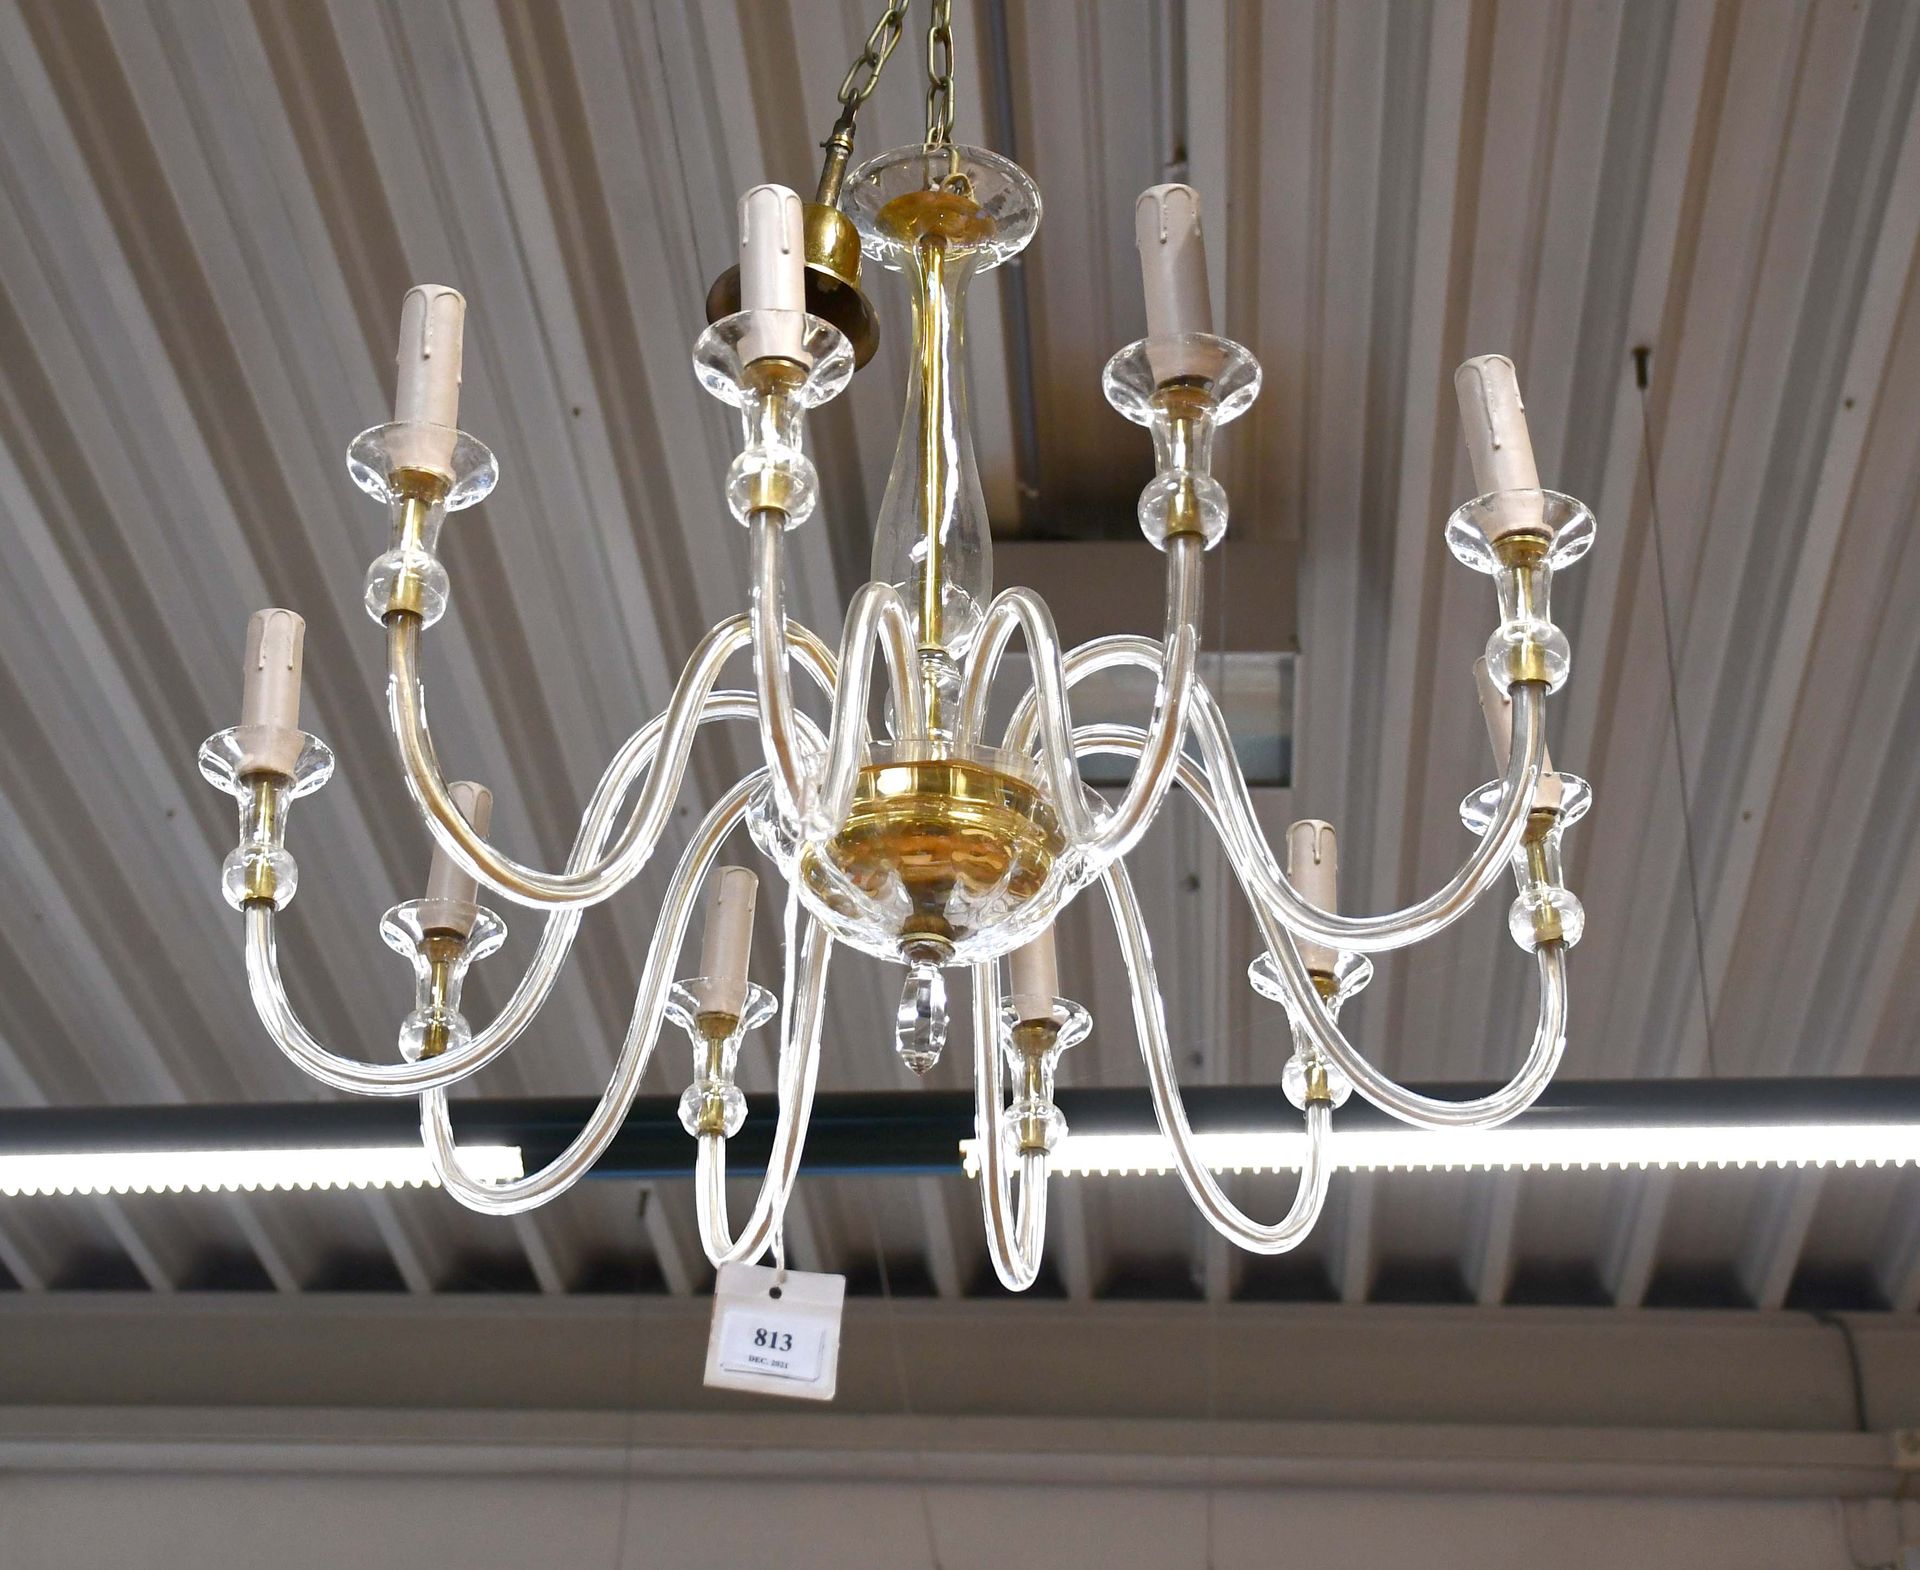 Null Glass chandelier with ten arms of light